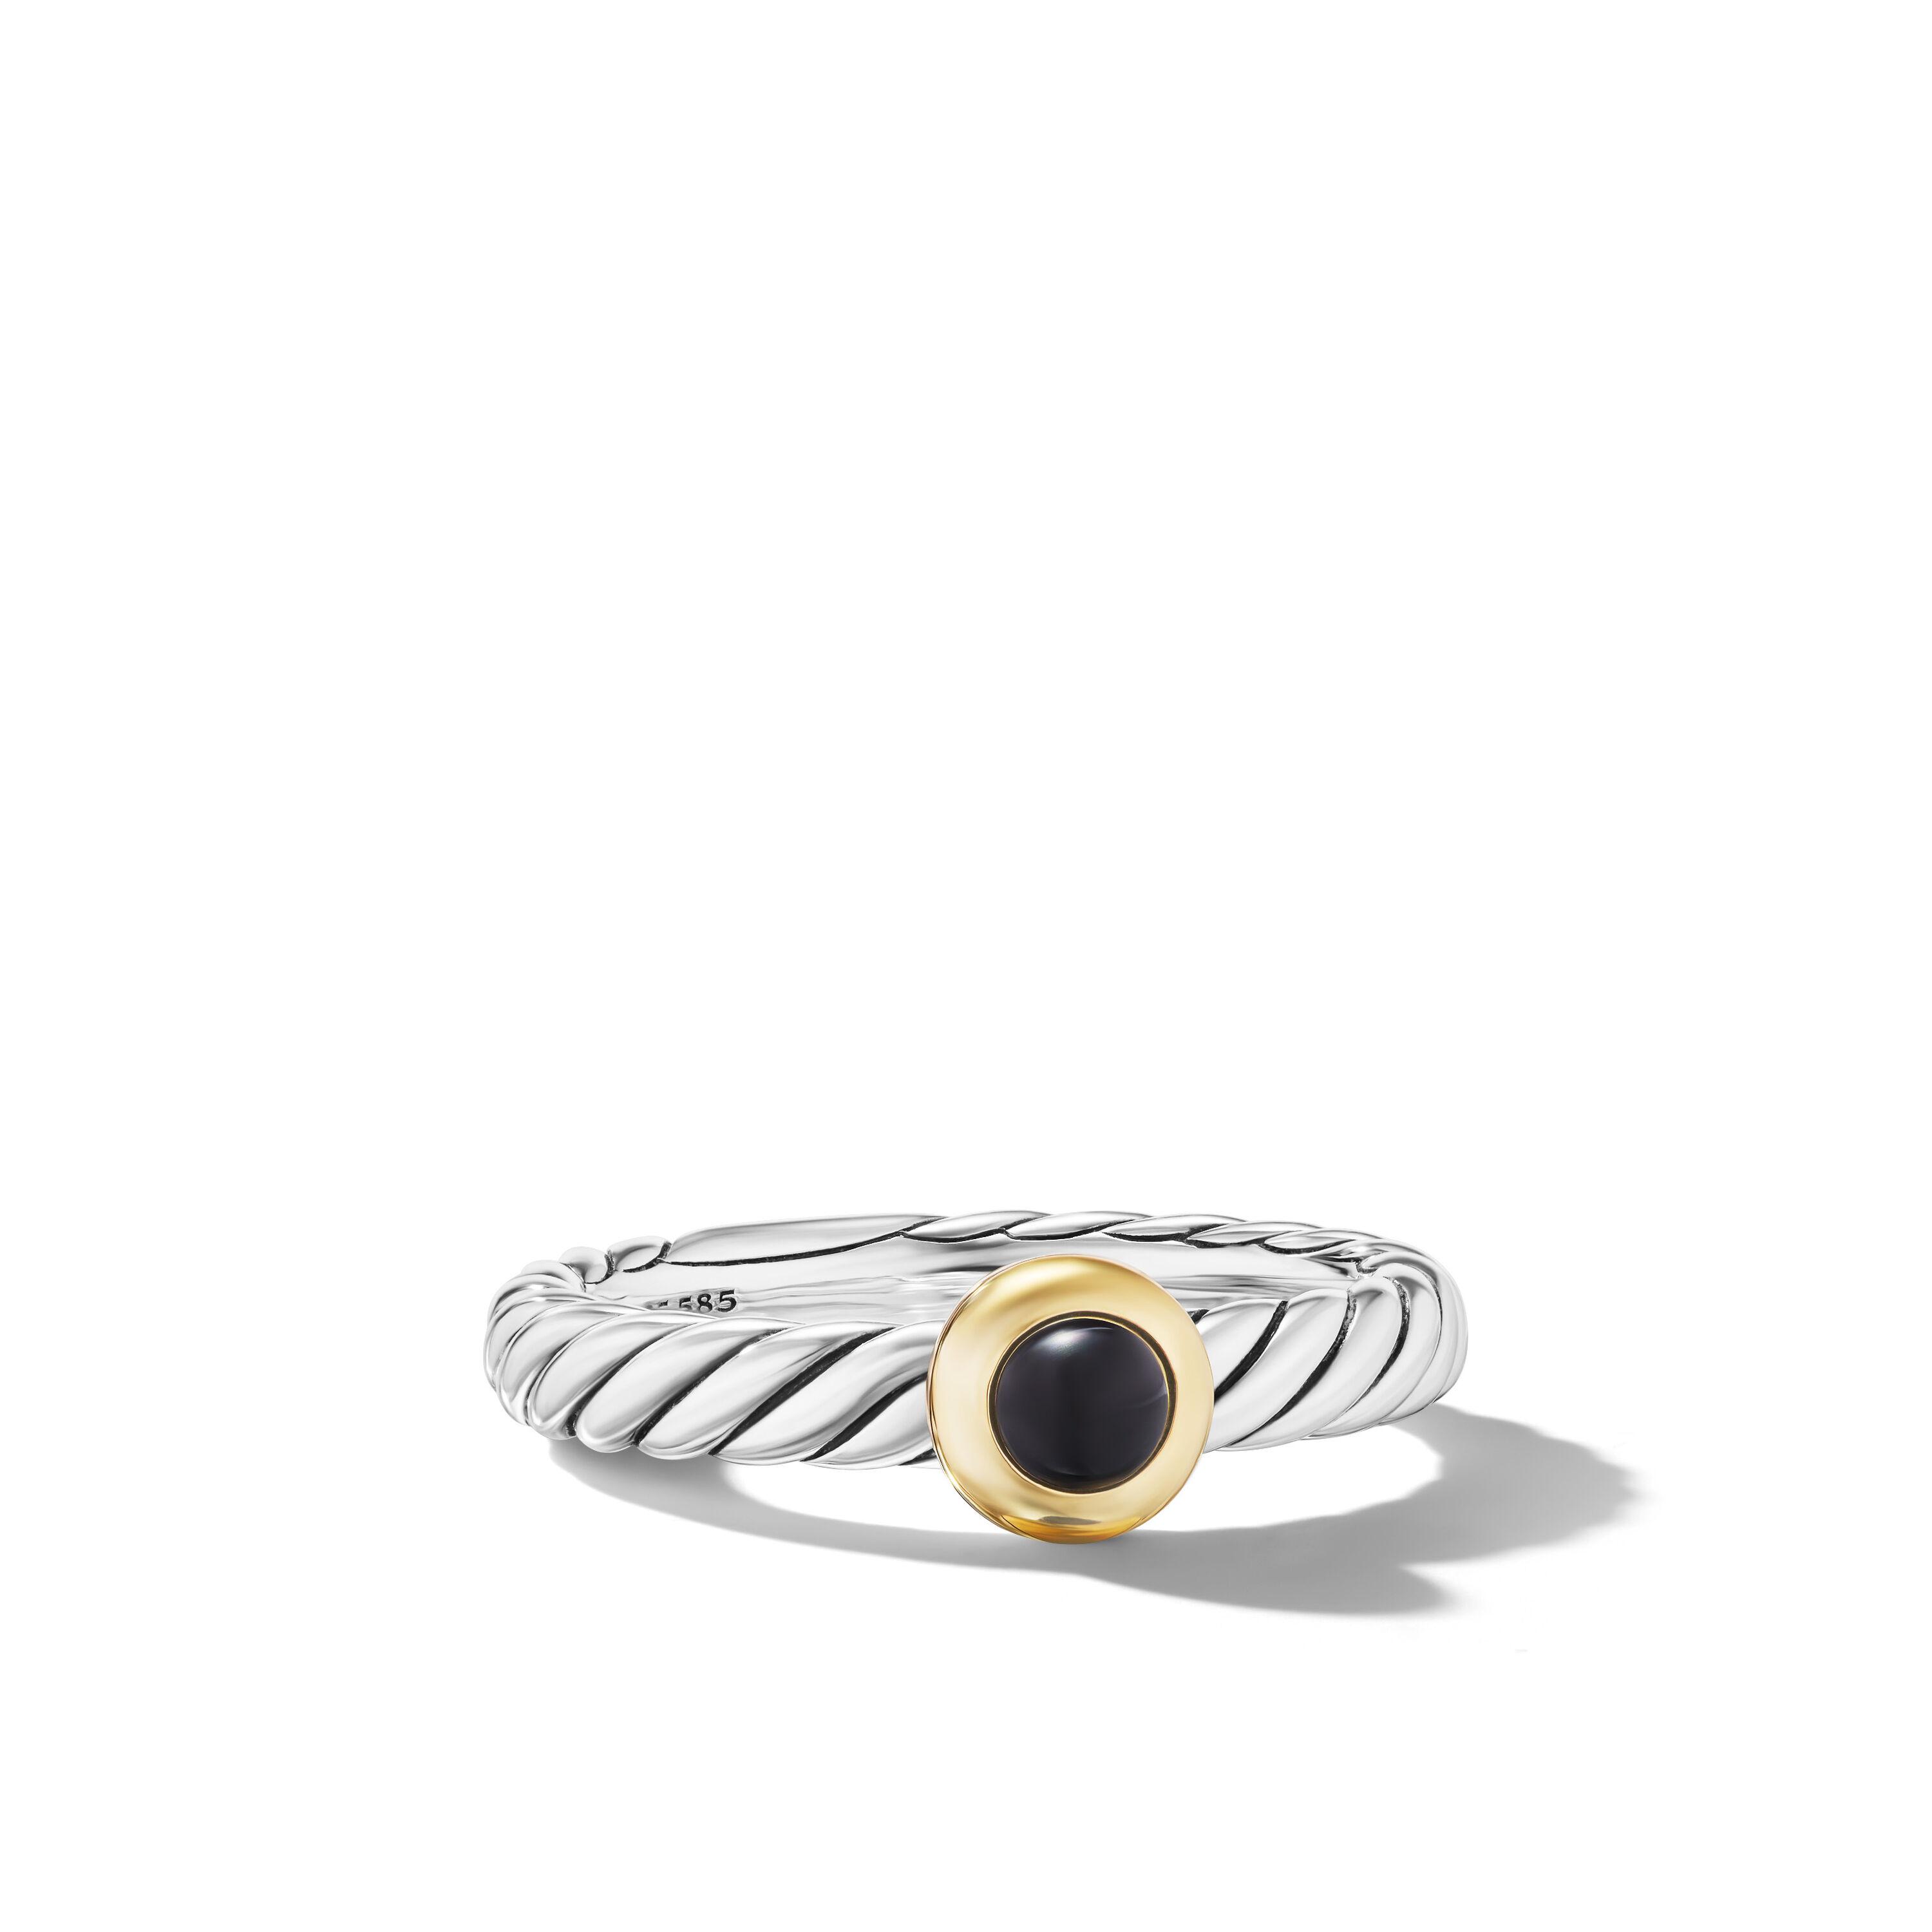 David Yurman Petite Cable Ring in Sterling Silver with 14K Yellow Gold and Black Onyx, Size 6 0